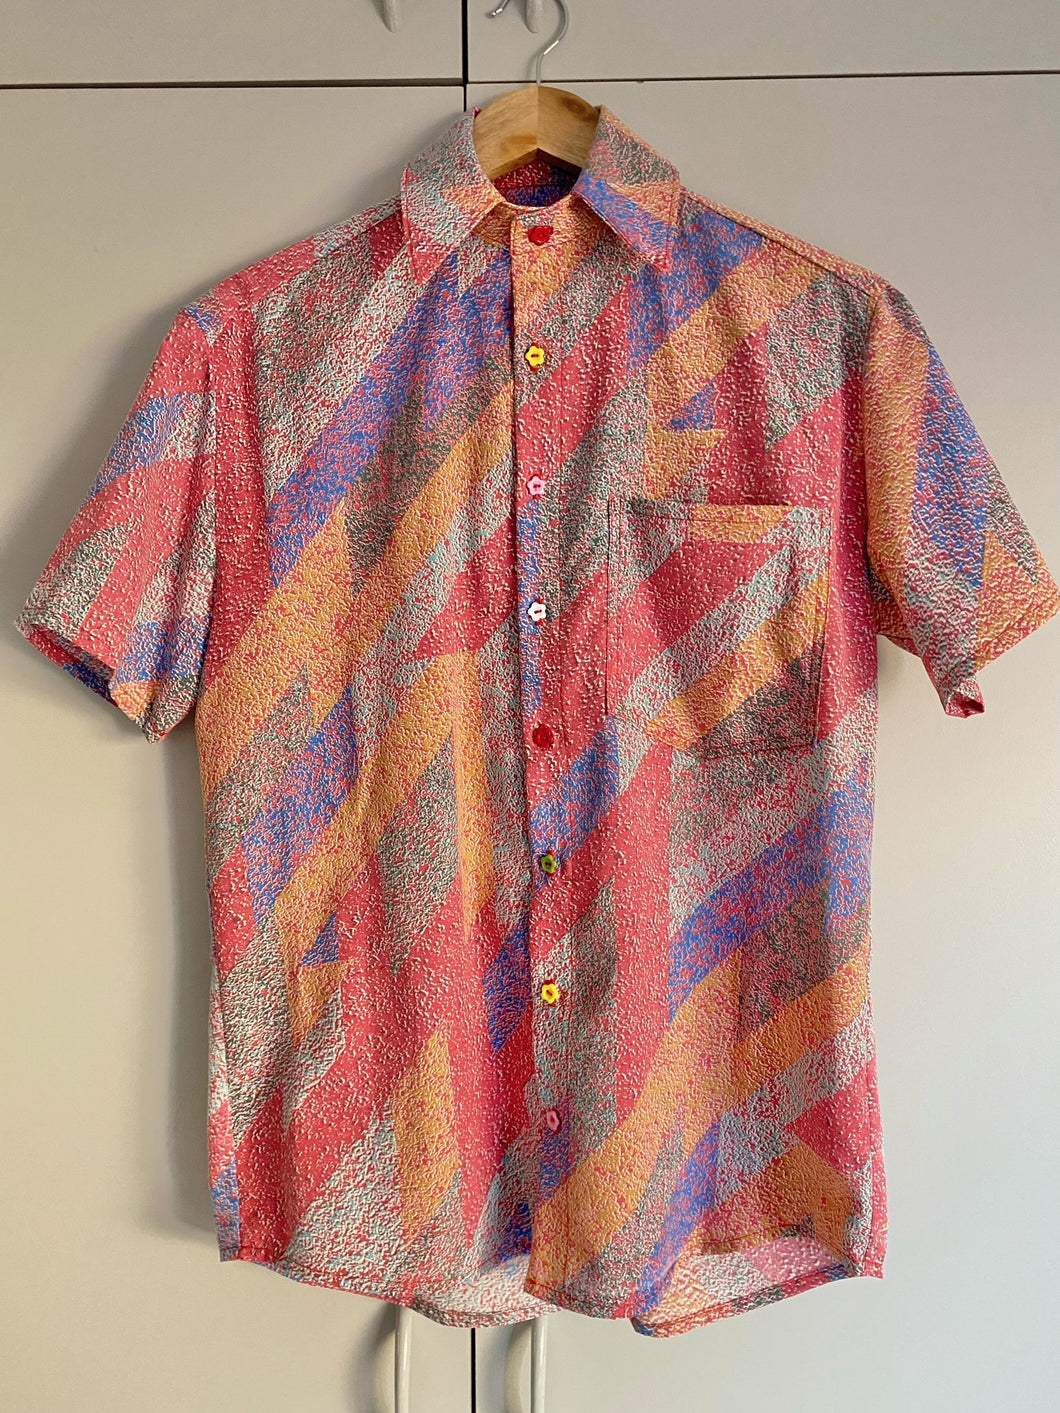 Scorched Phonelines Button Up Shirt - Unisex, Fabric Imperfections